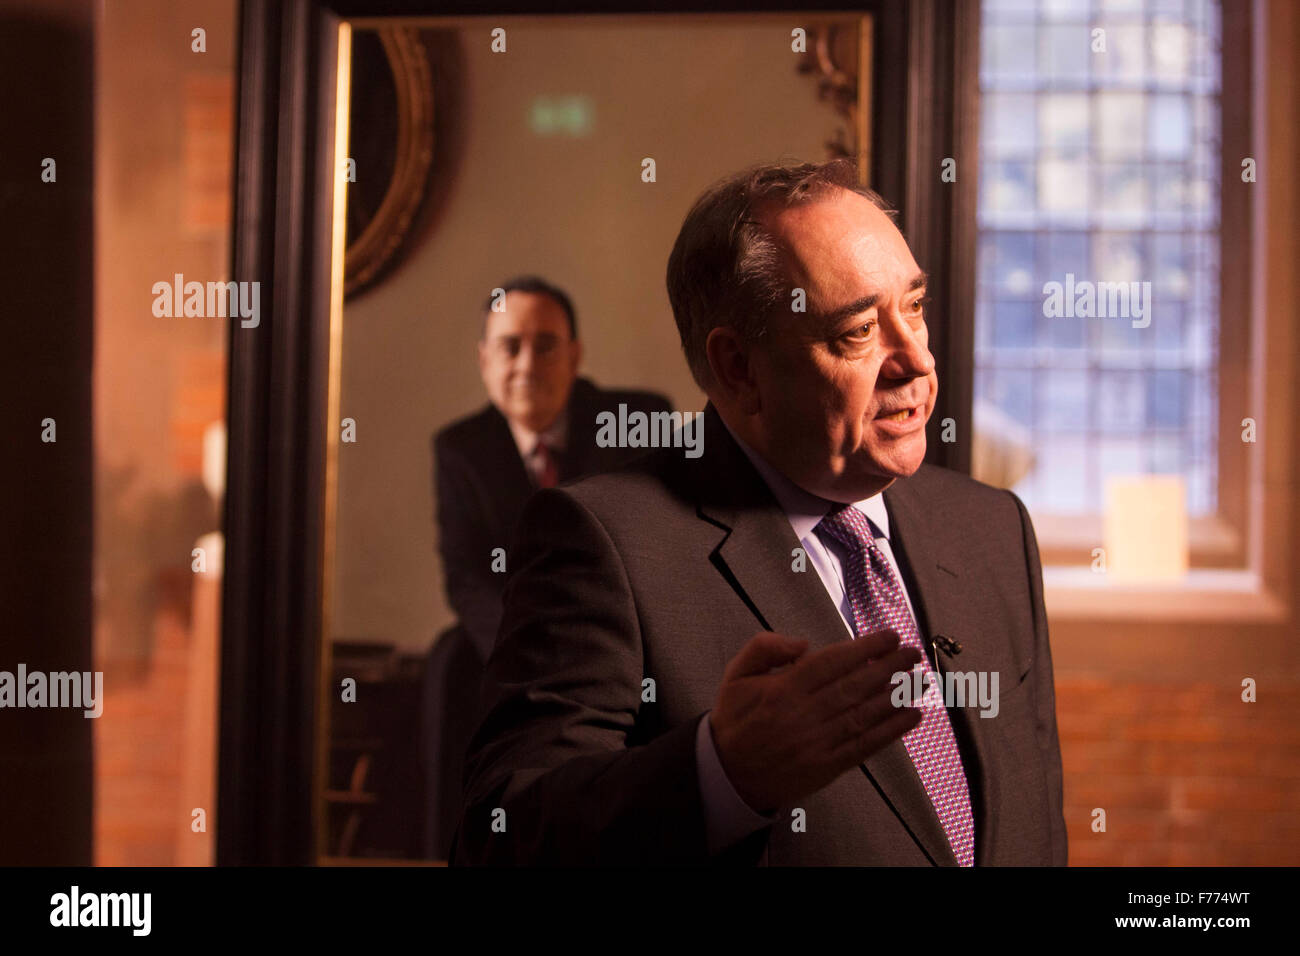 Edinburgh, UK. 26th November, 2015. A portrait of the RT Hon Alex Salmond MP MSP display on show at the Scottish National Portrait Gallery this week. The portrait was part of a group of fourteen works painted by Gerard M Burns. Pictured Alex Salmond. Pako Mera/Alamy Live News. Stock Photo